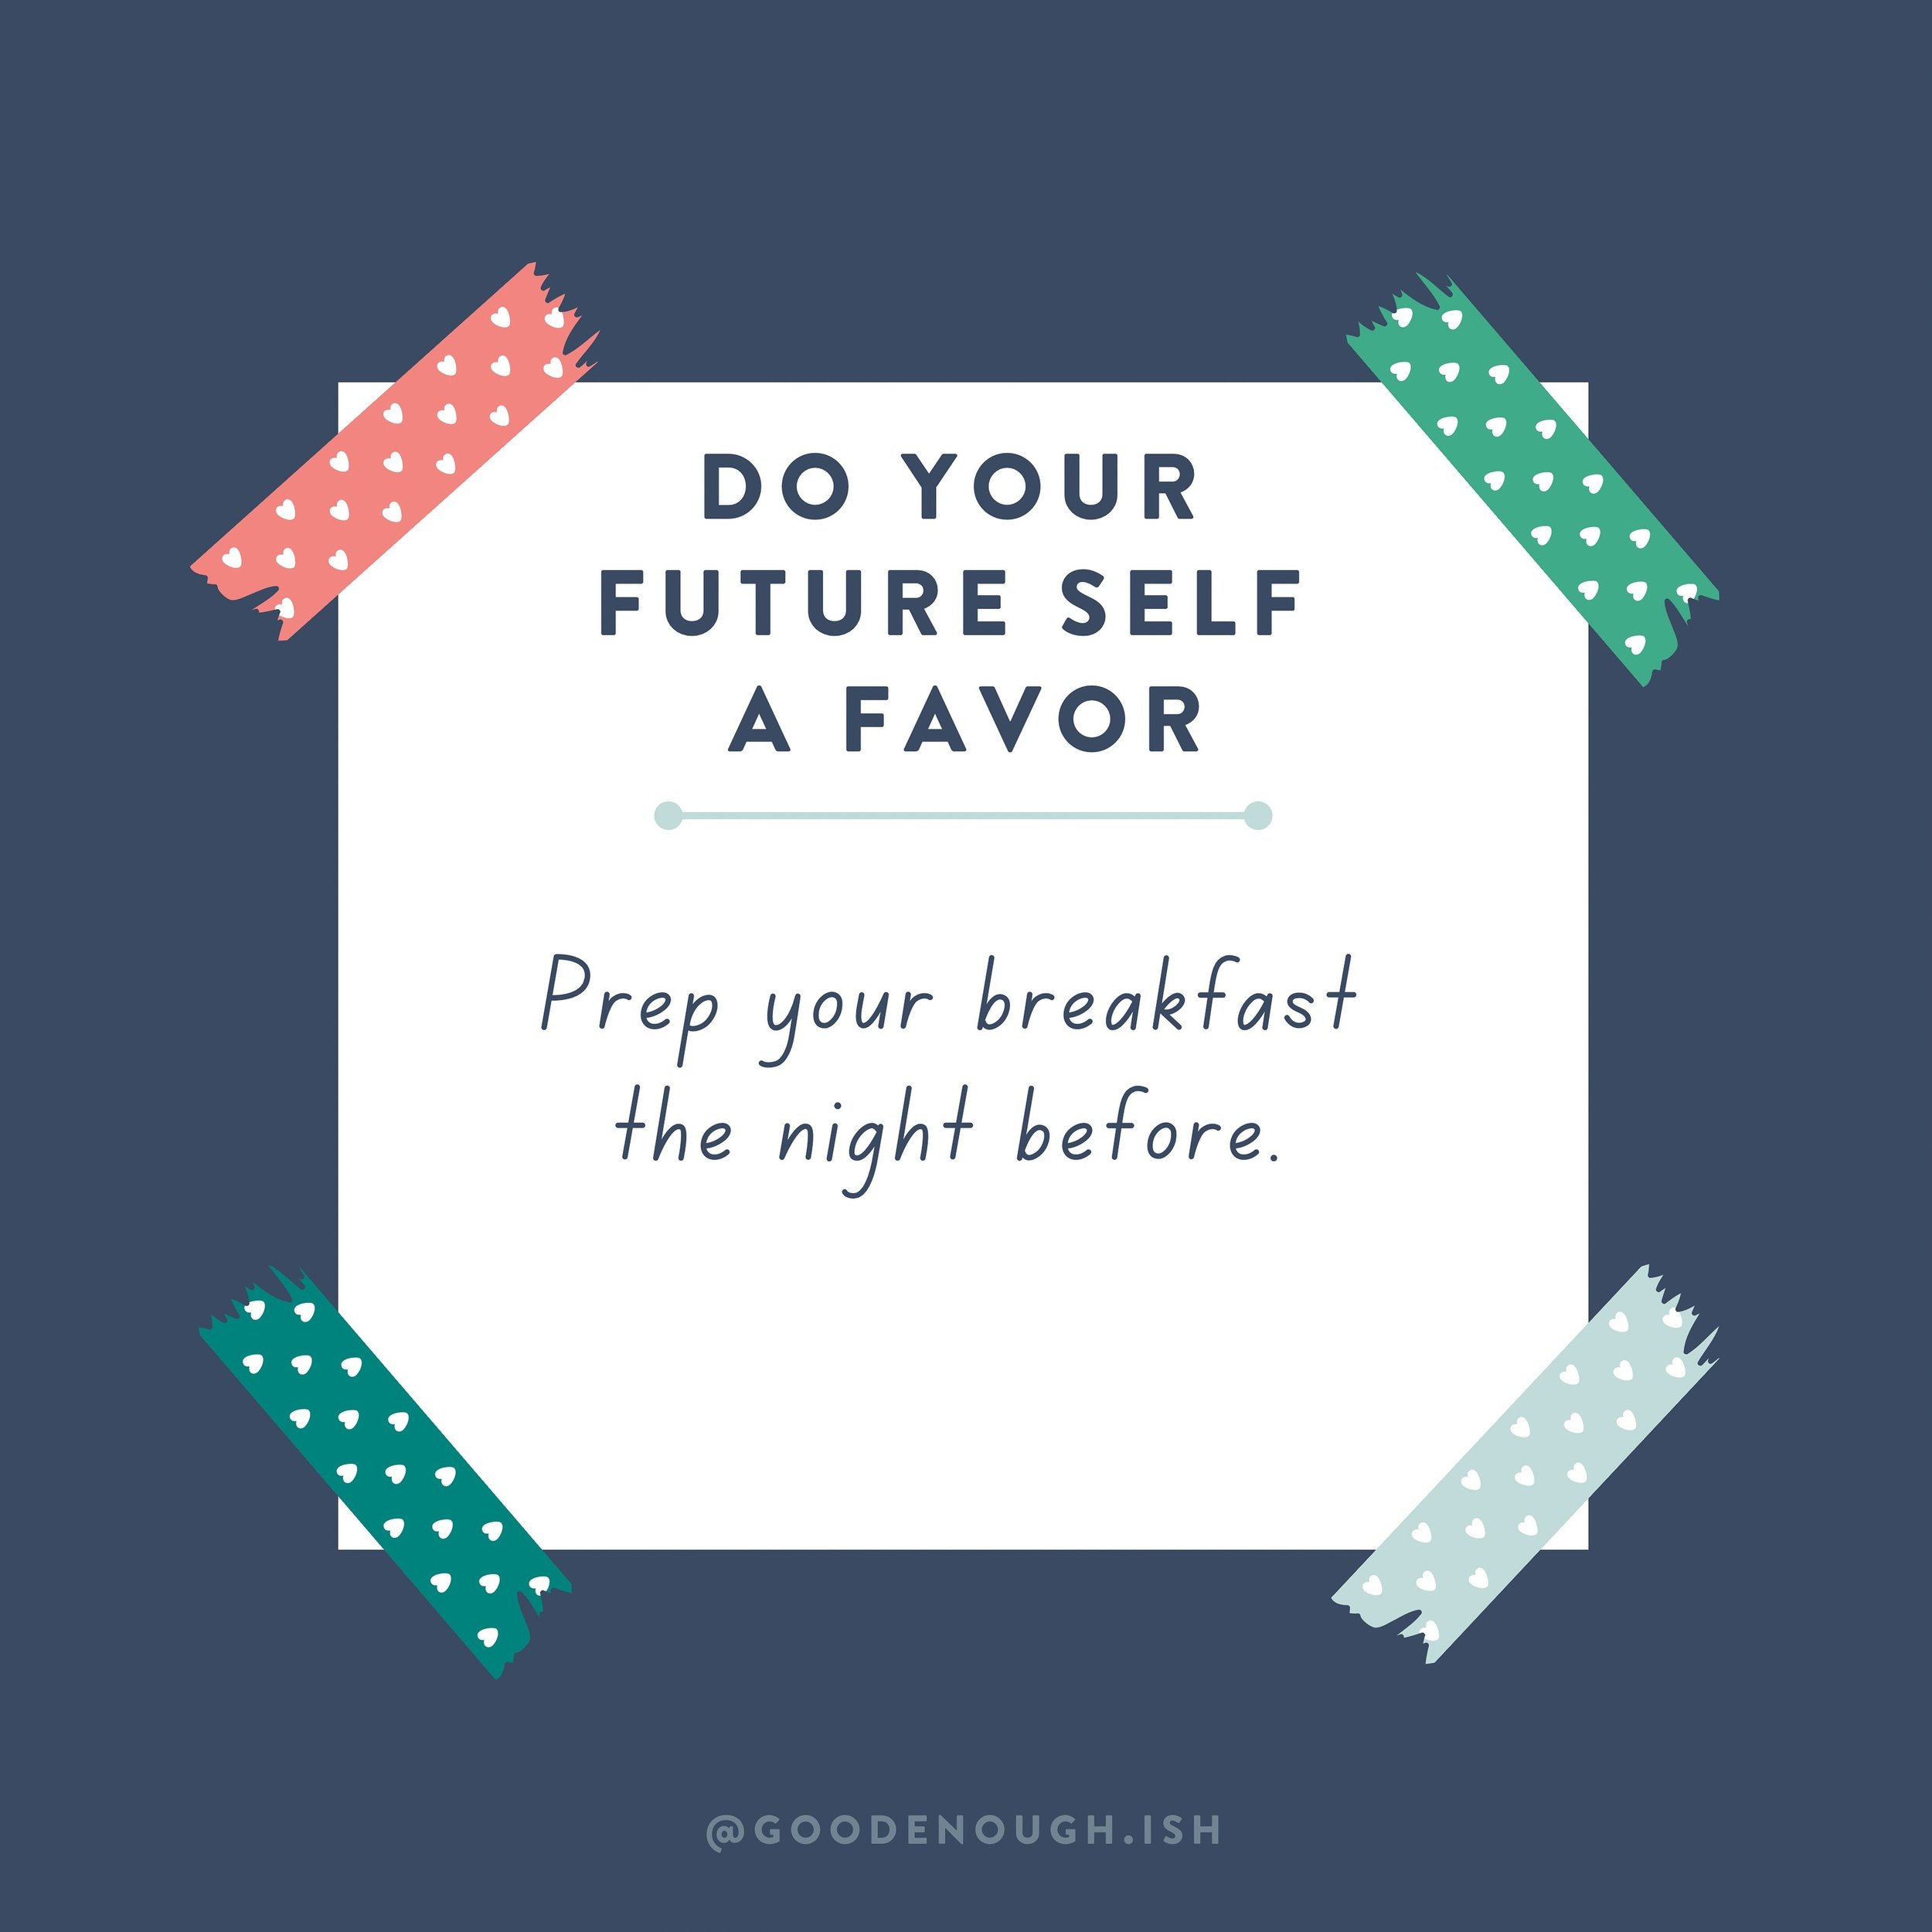 In Episode 89, Amanda let us in on a real morning brightener: overnight oats prepped the night before, then reheated on the stove for a cozy, satisfying breakfast. 🥣

Start your day off right and save time by prepping your breakfast the night before